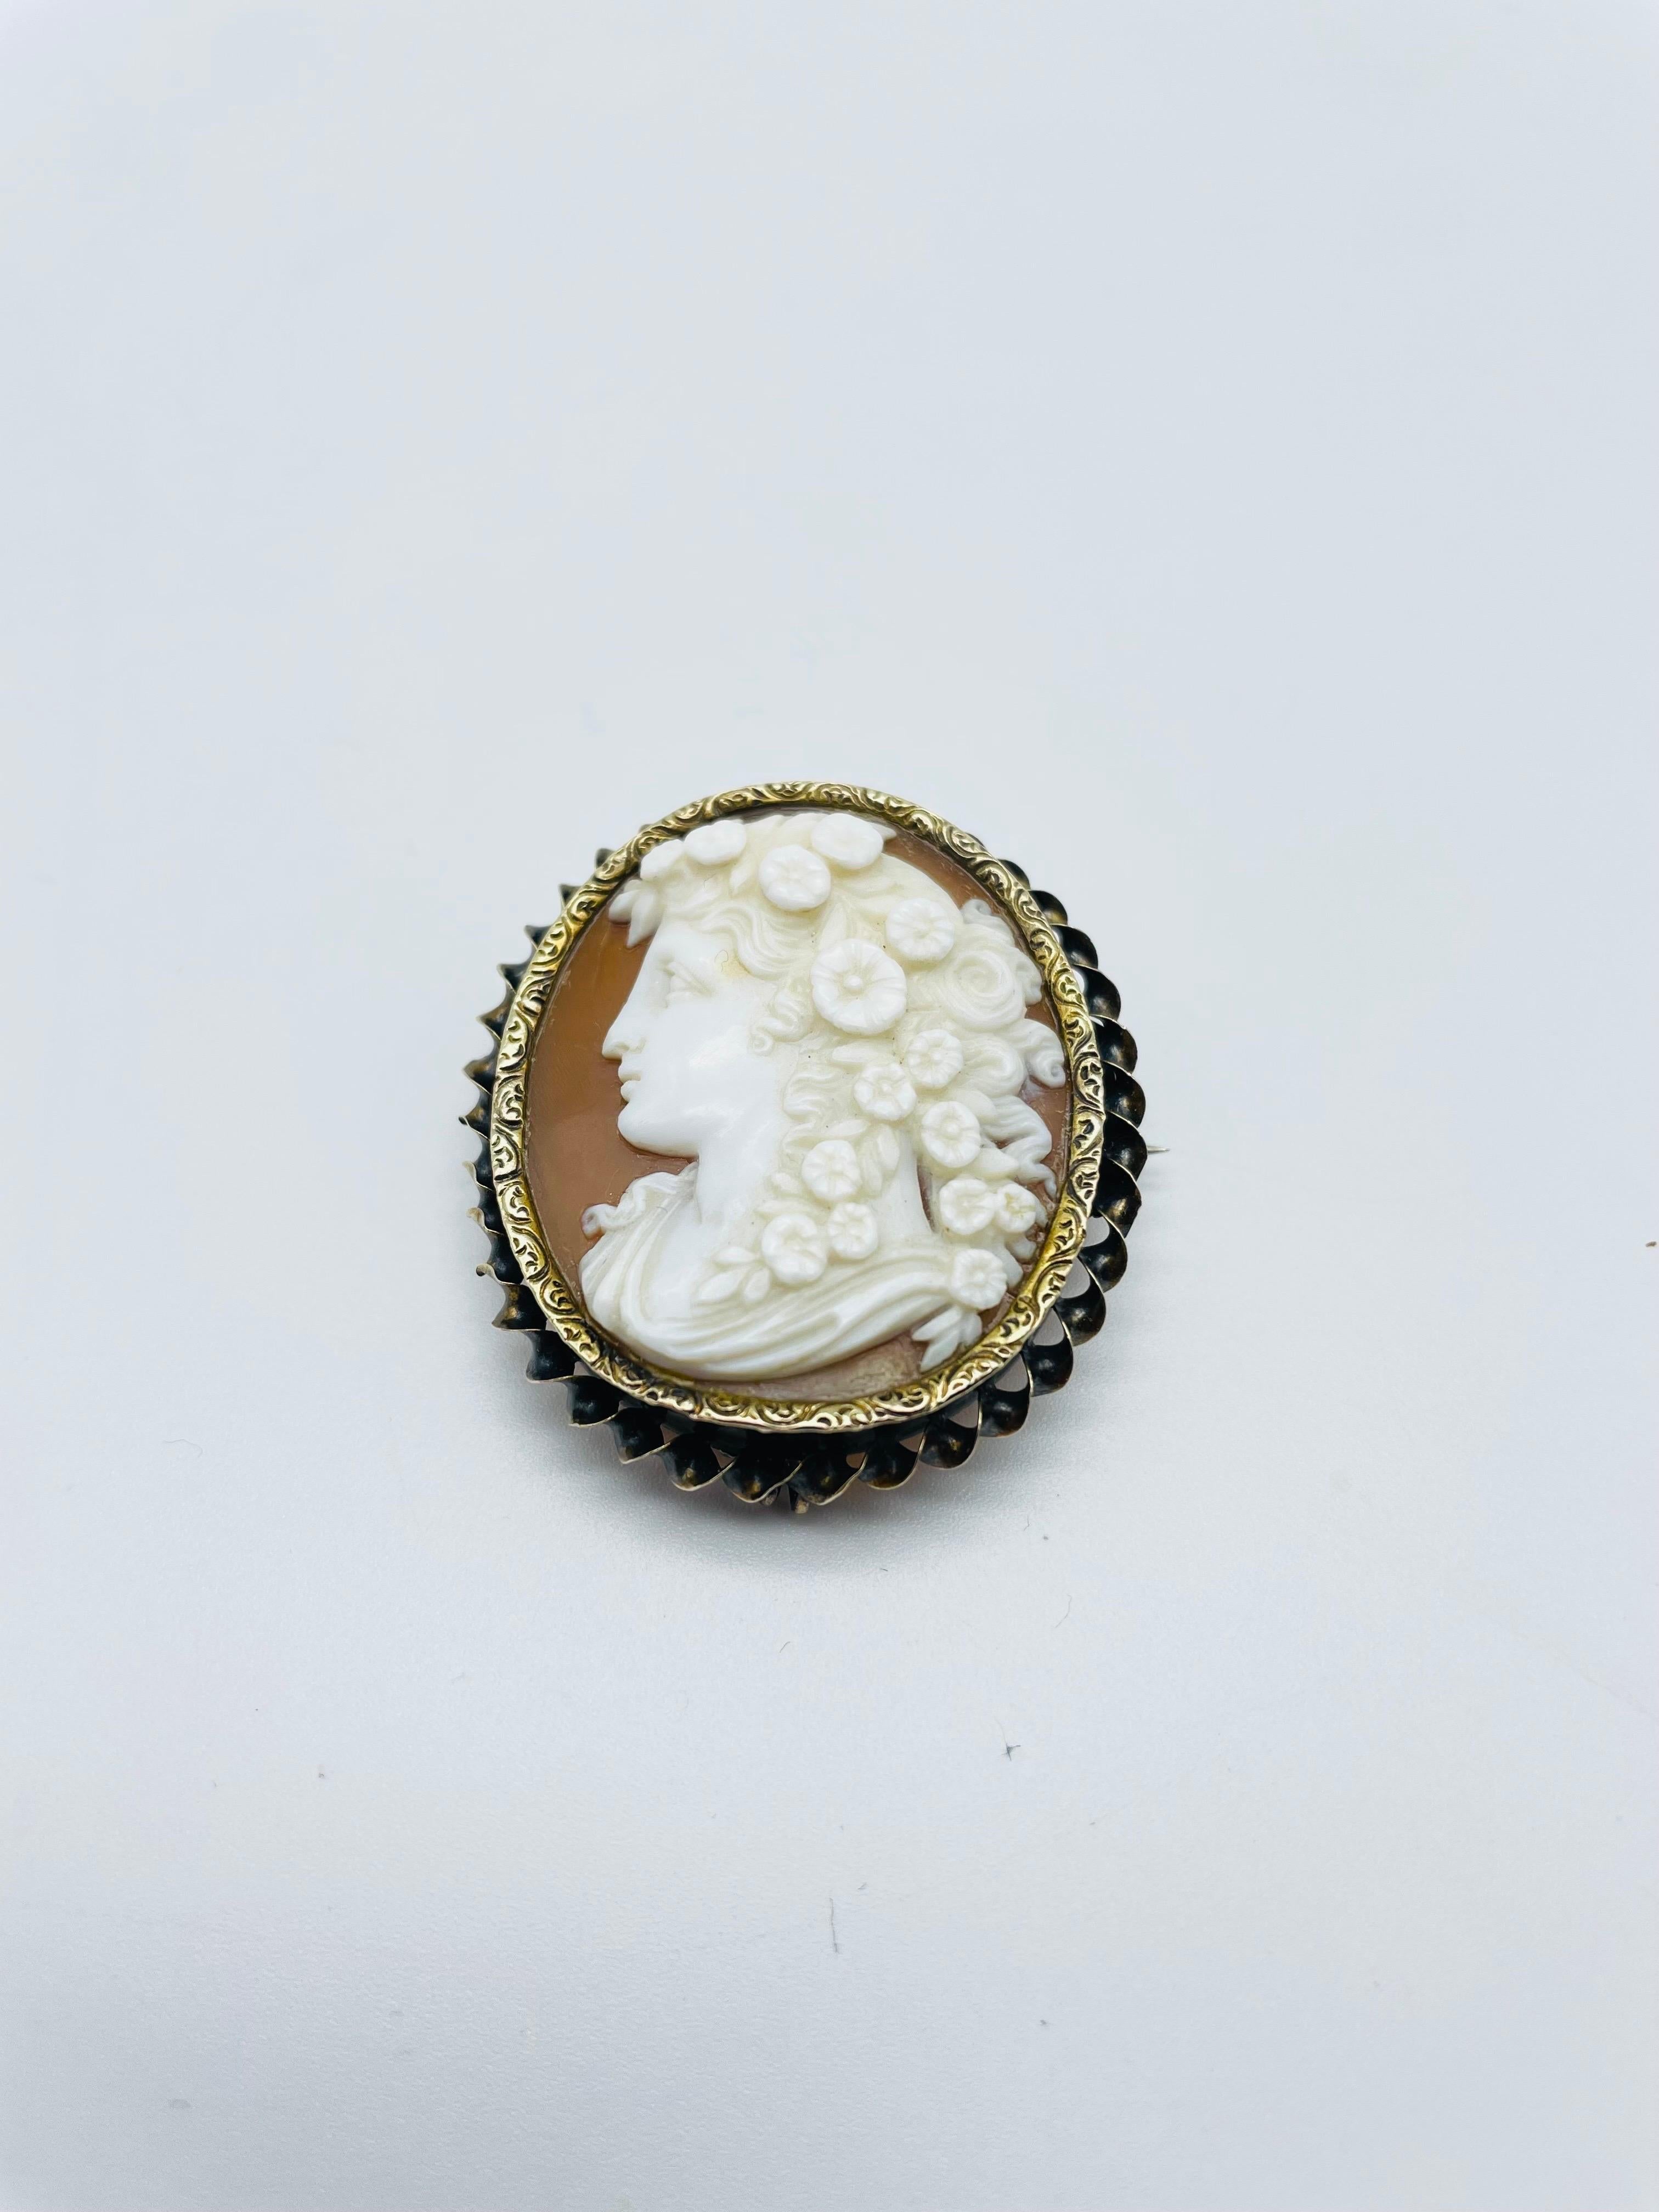 AThis antique brooch is a true work of art. Crafted in 14K yellow gold, it boasts a finely detailed cameo depicting the portrait of a young lady with flowing hair. The intricate craftsmanship is evident in every detail, from the delicate features of